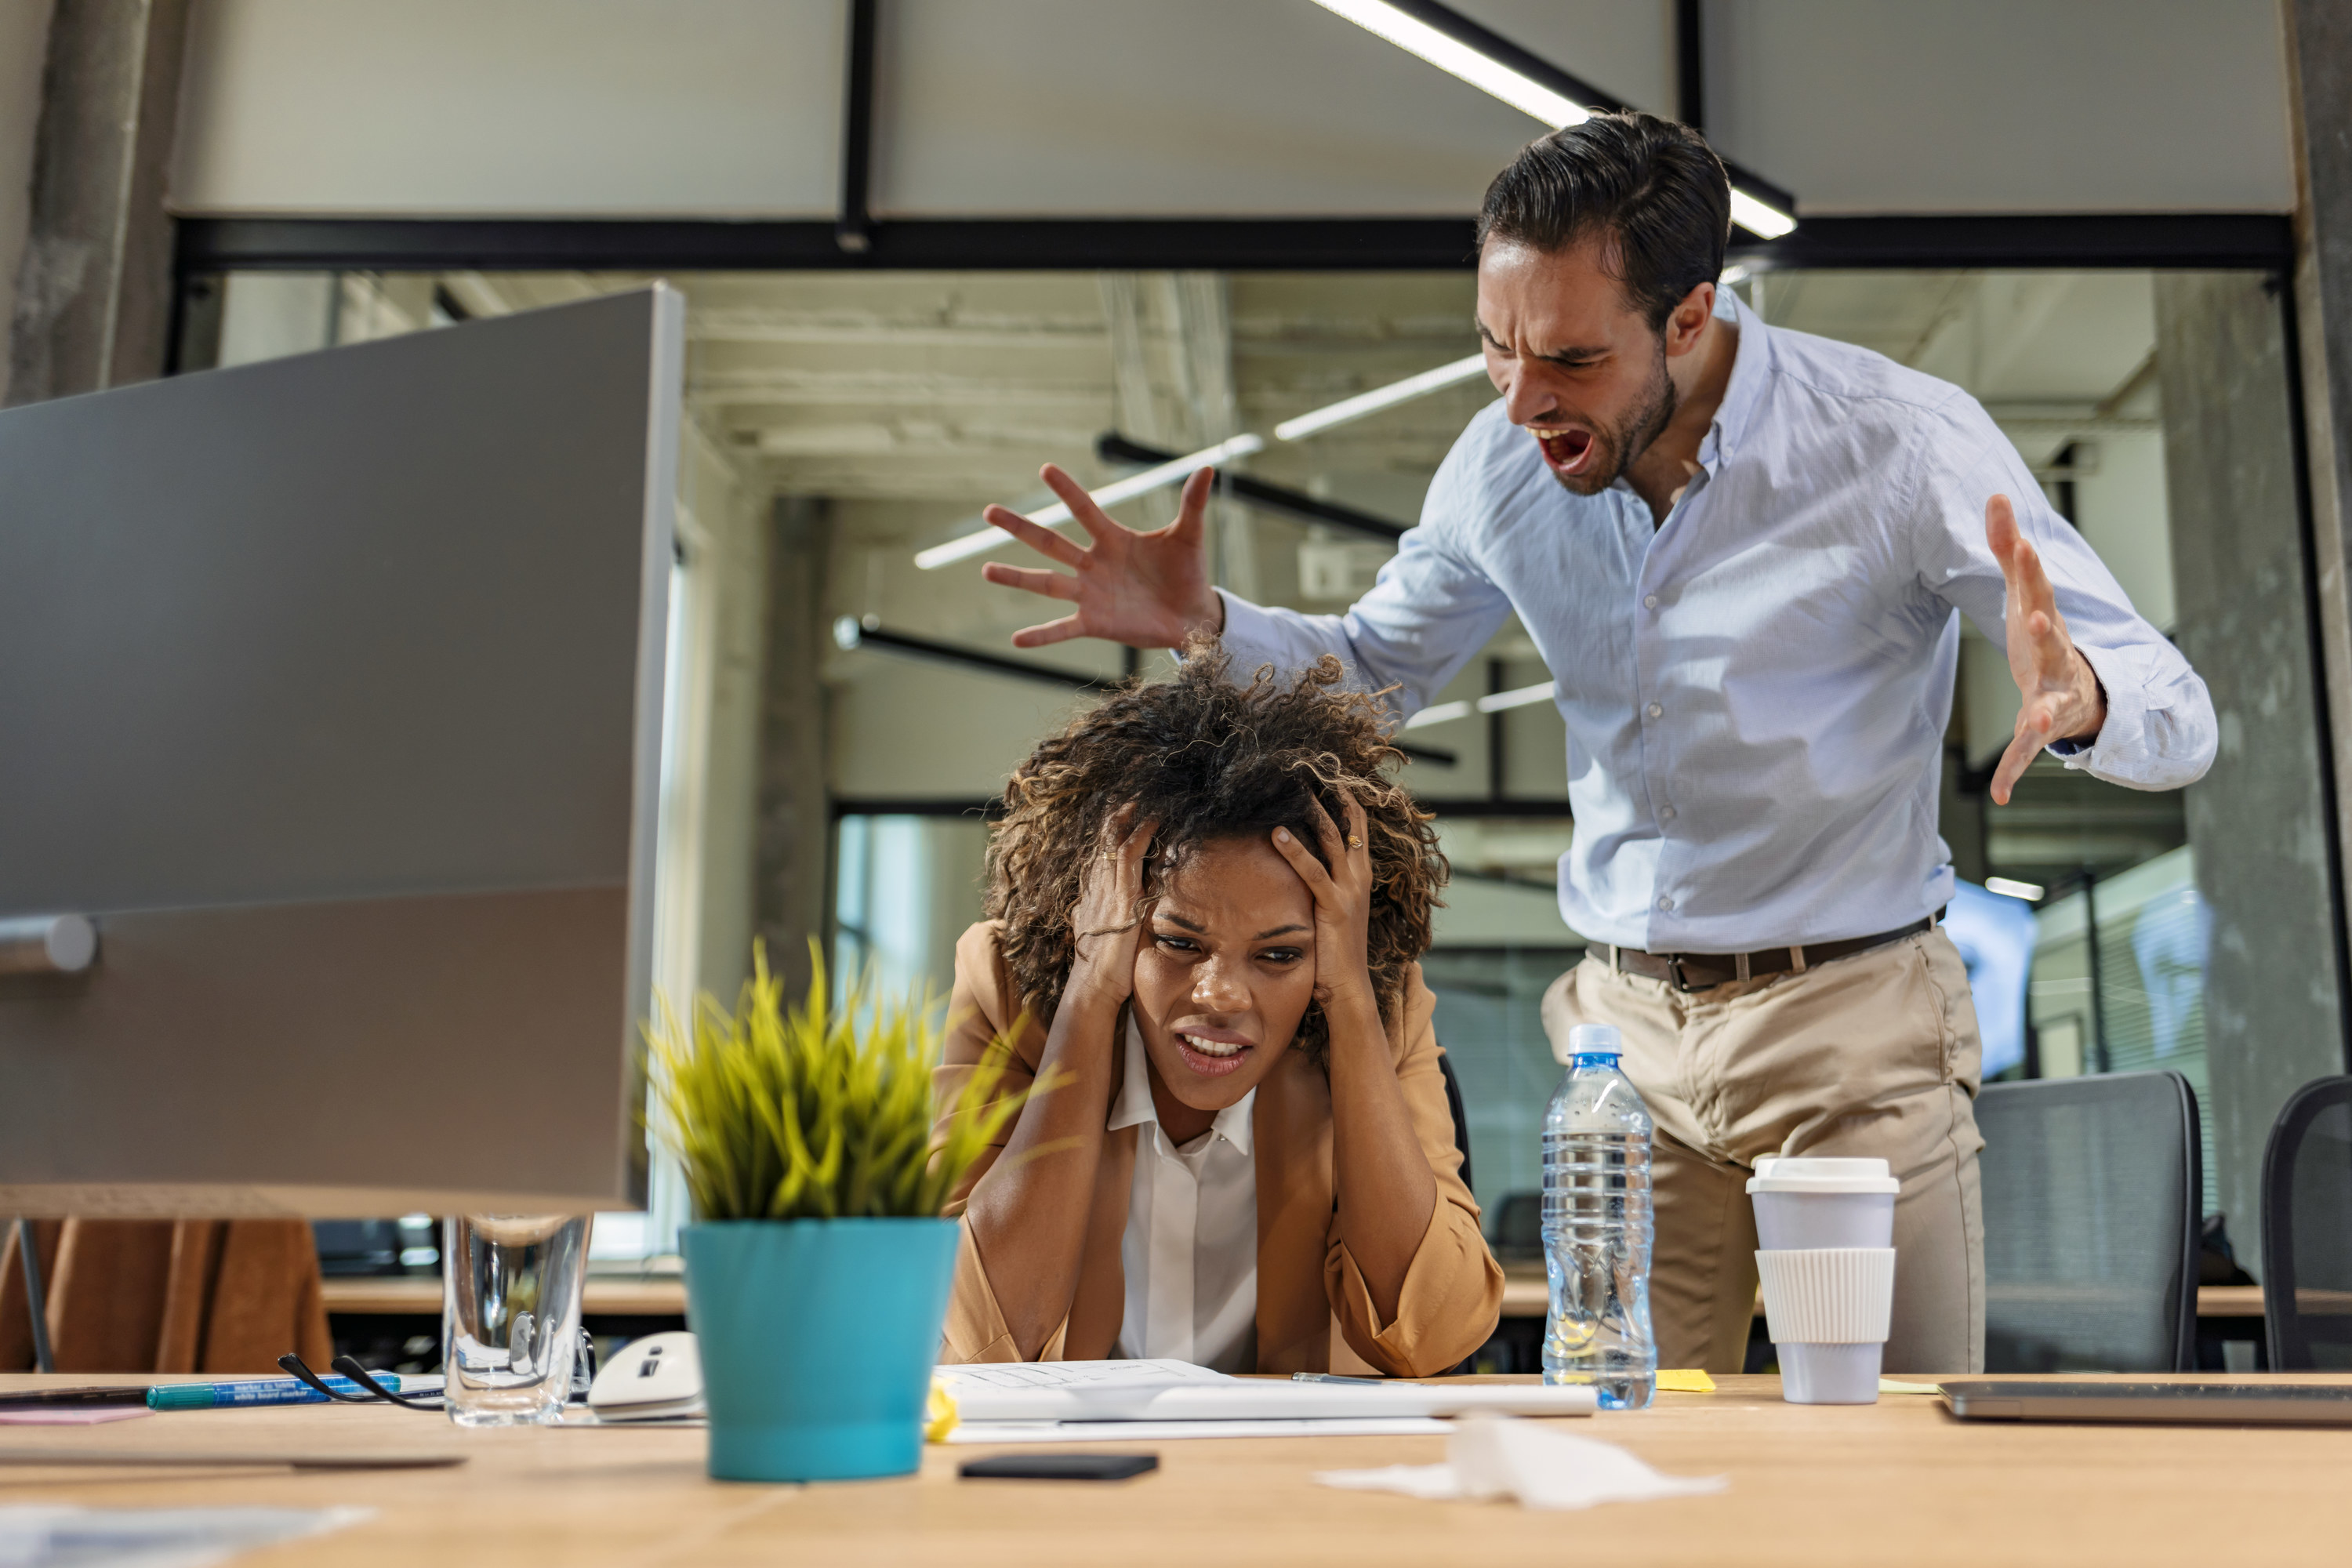 A man standing while yelling at a woman who is sitting at her desk looking stressed